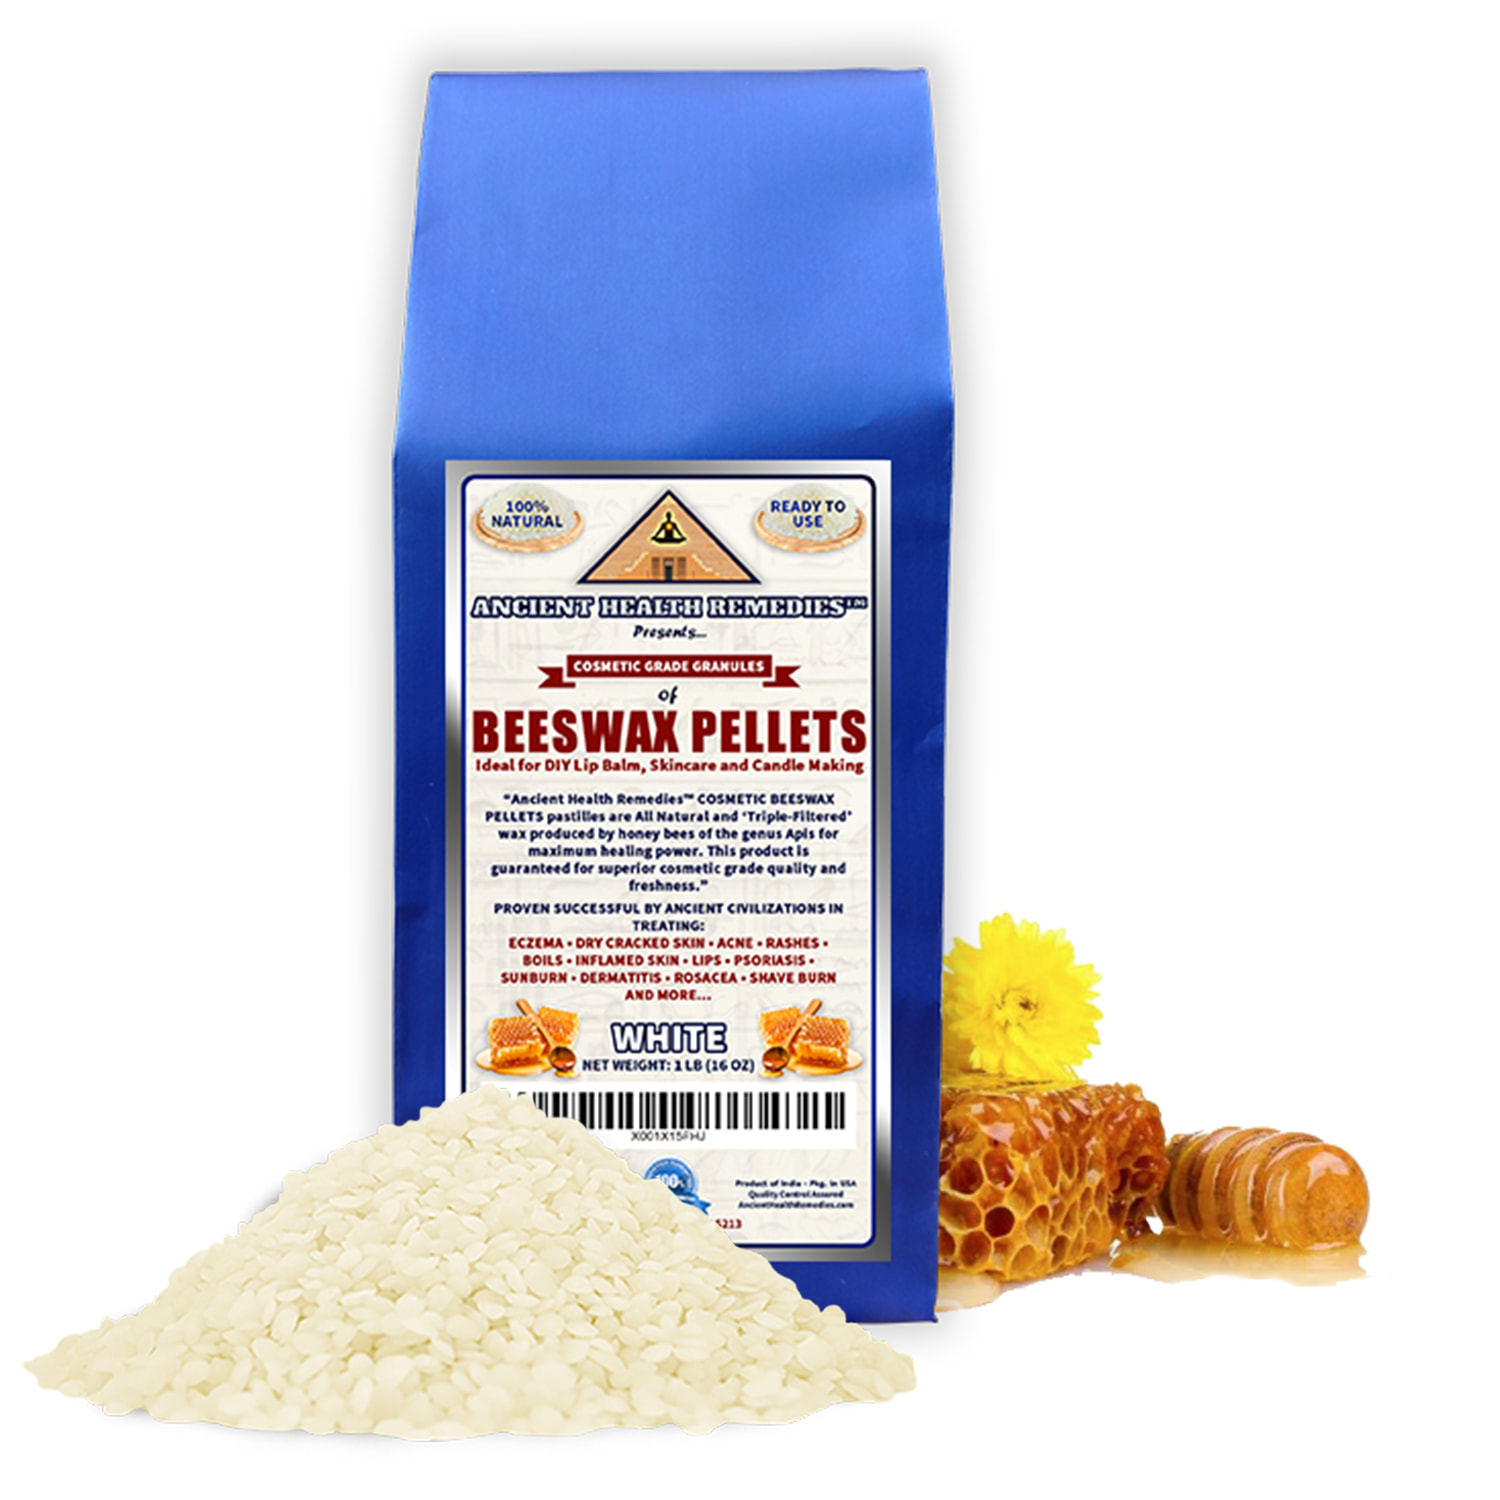 White Beeswax Pellets by White Naturals Great For DIY Lip Balms